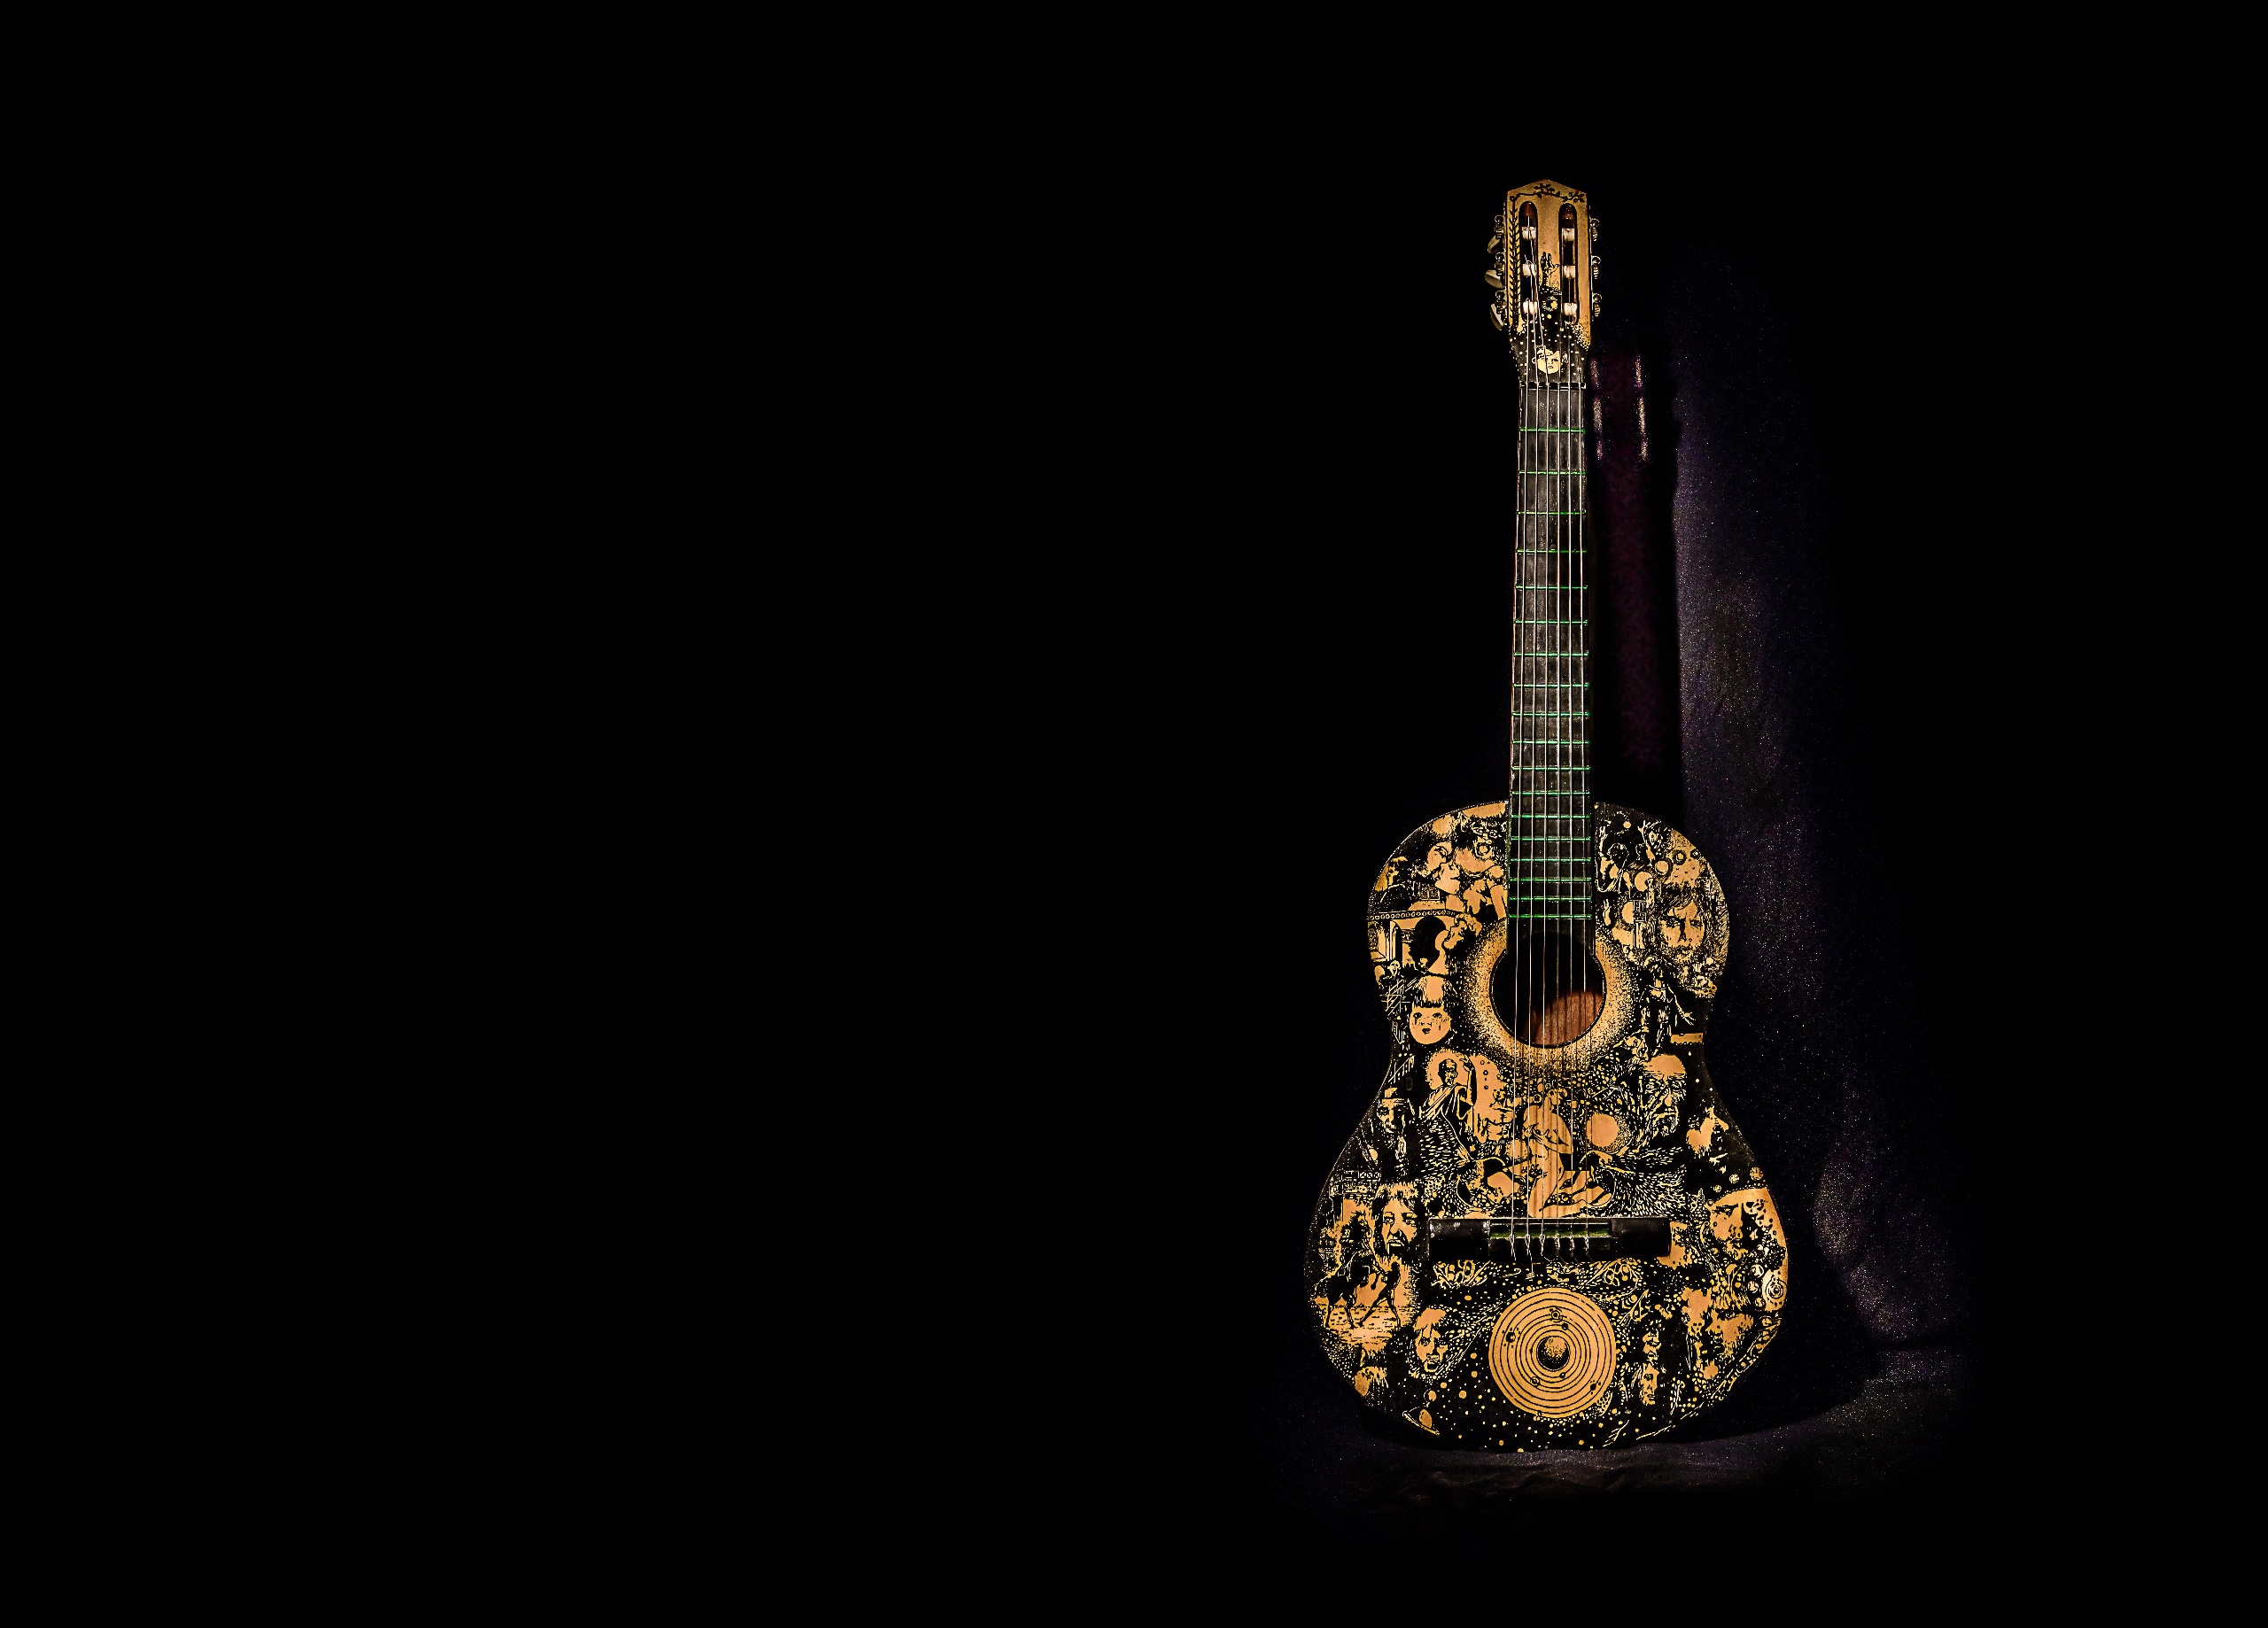 General 2560x1838 guitar simple background musical instrument